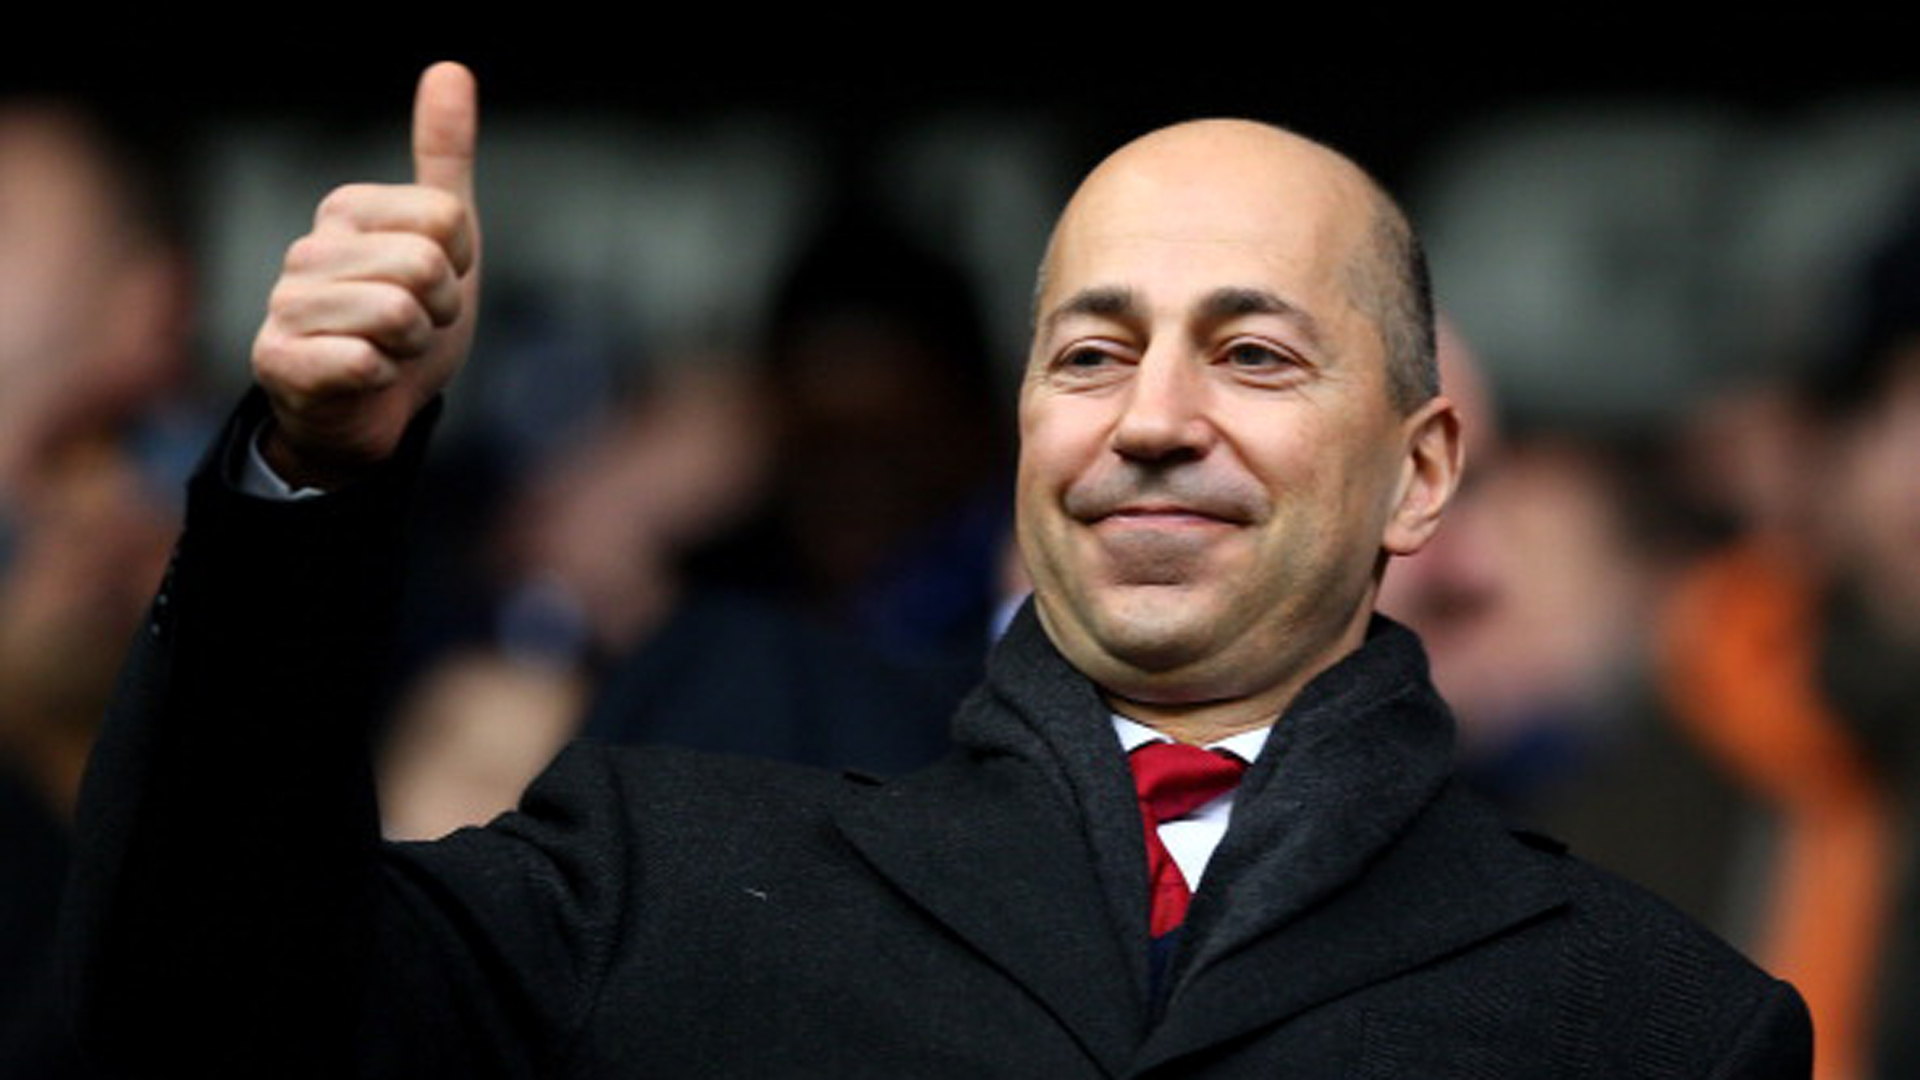 ‘Arsenal have to act as they’re getting worse’ – Wright points finger of blame at mismanagement of Gazidis